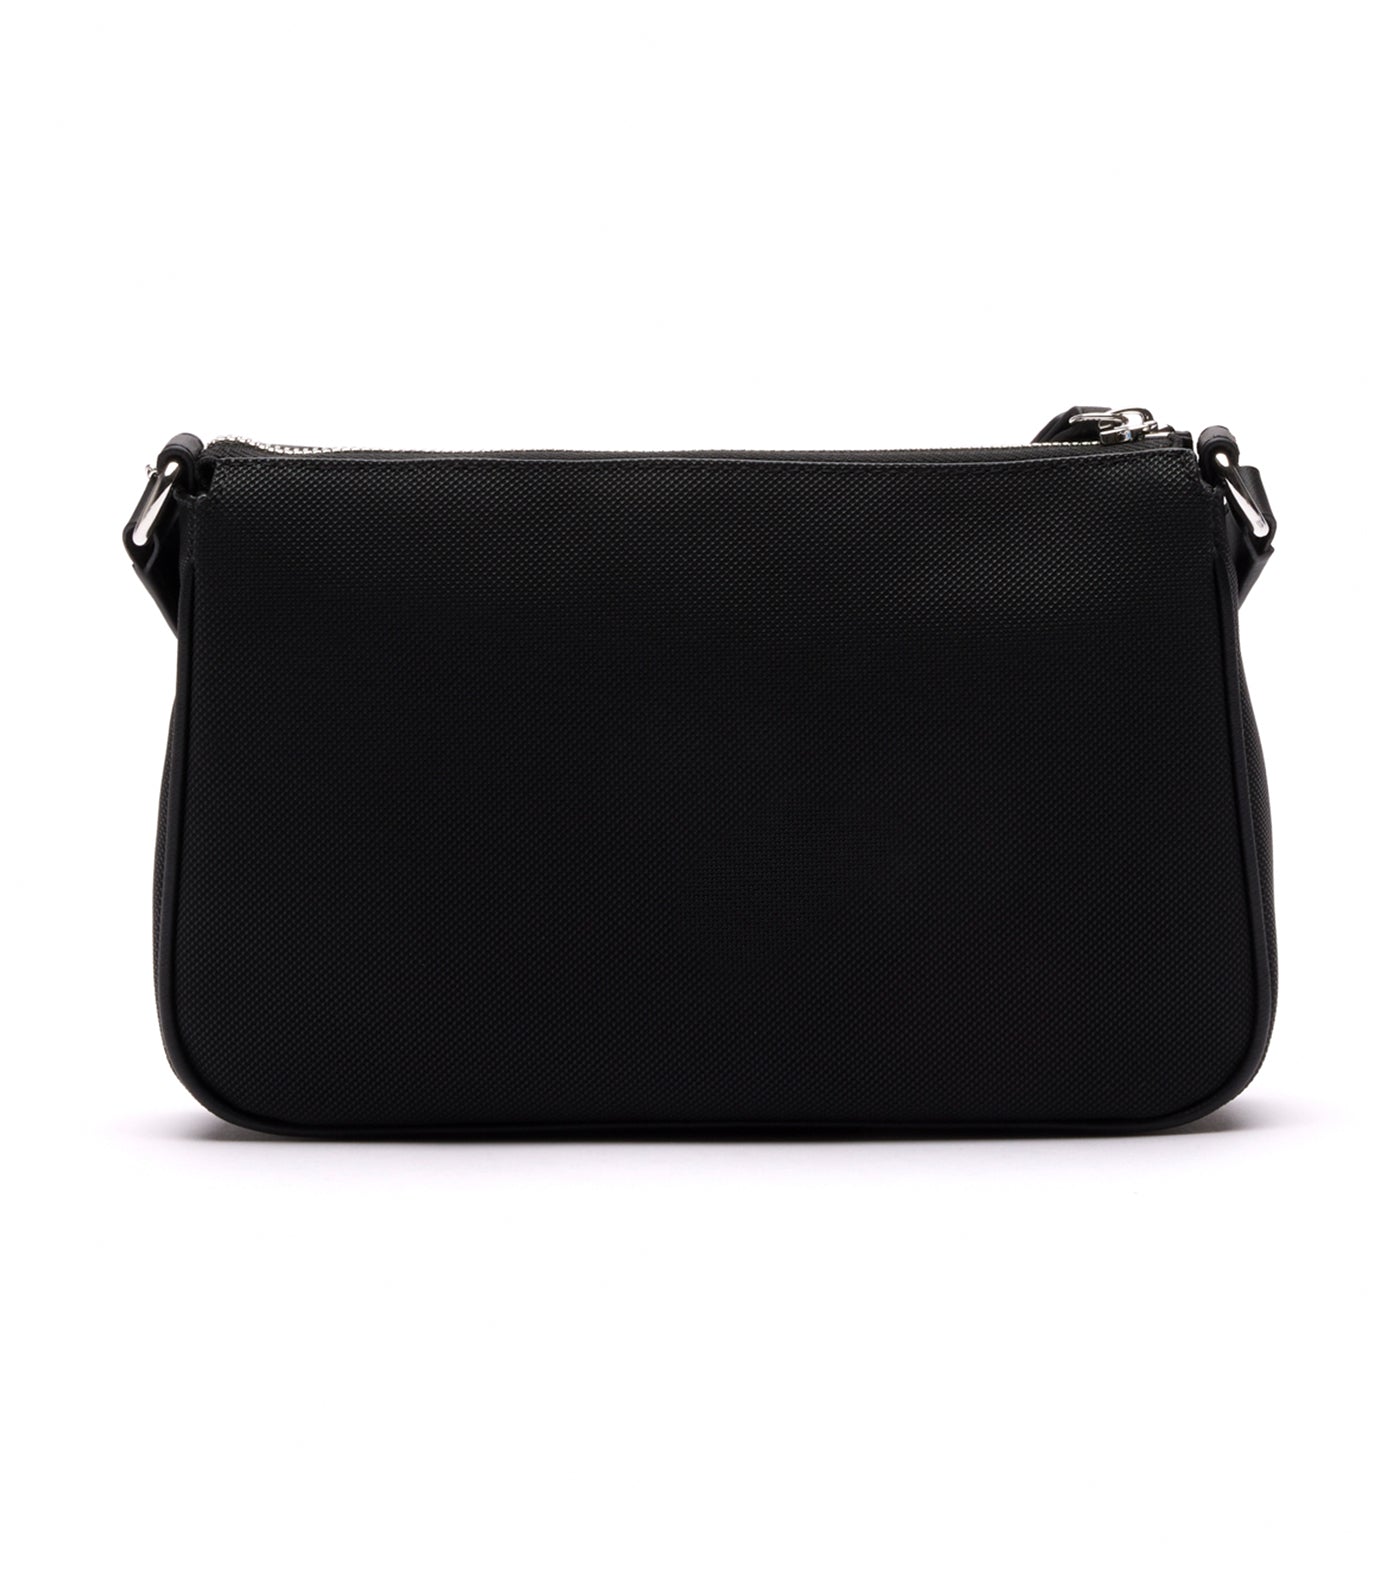 Women's Daily Lifestyle Crossover Bag Noir